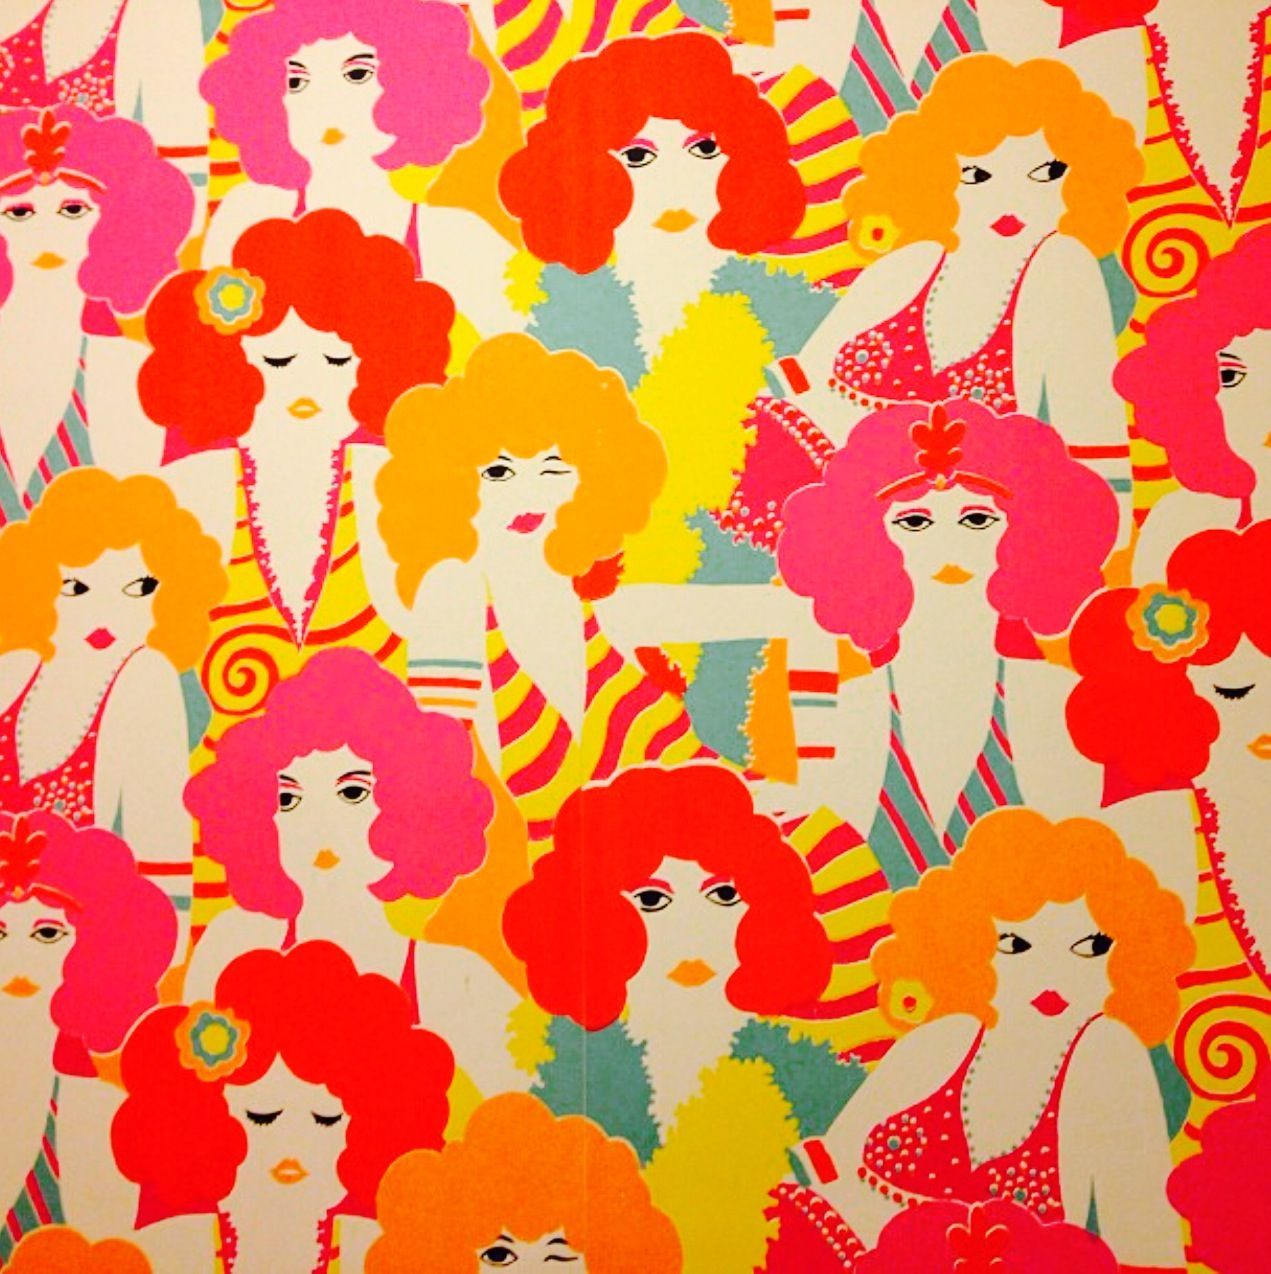 70's groovy foxy lady wallpapers print